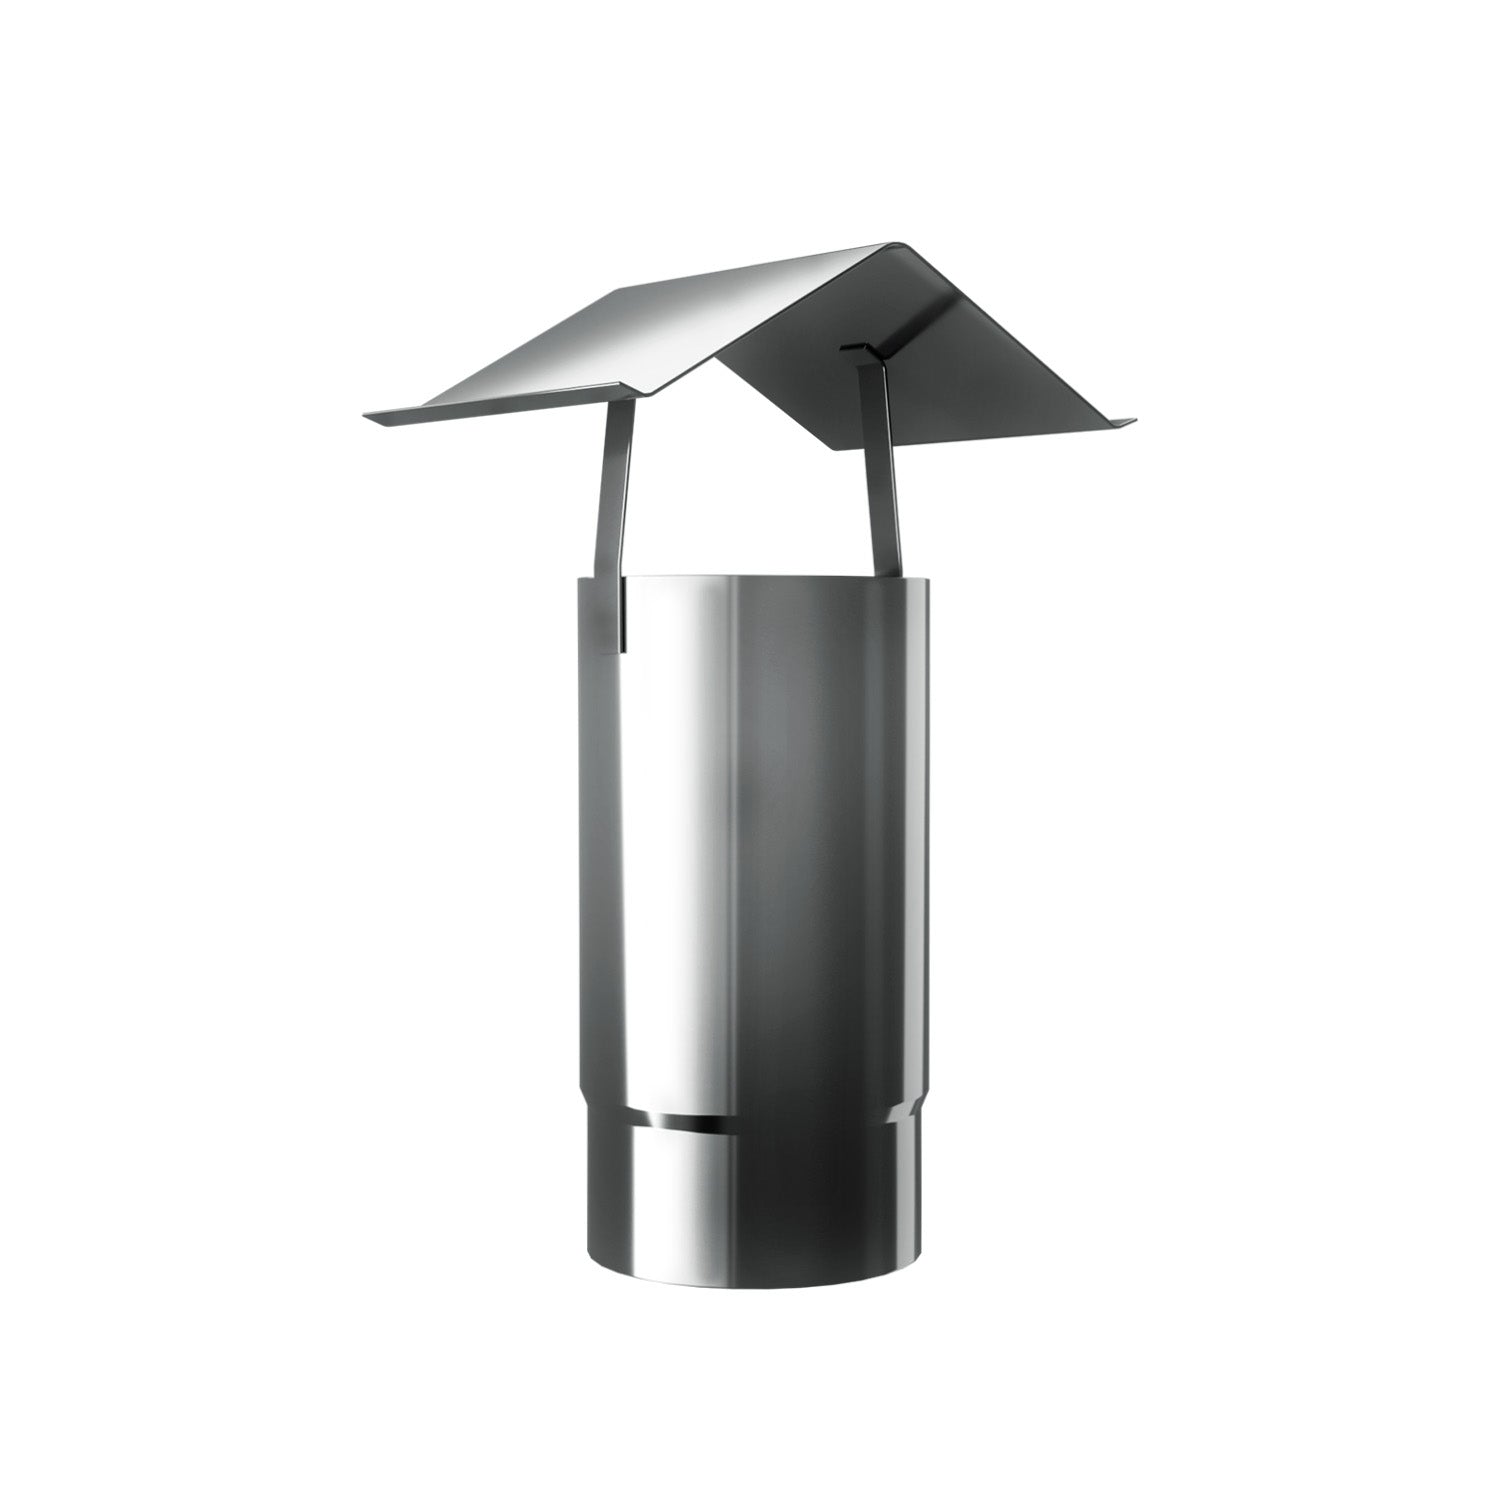 Rain hood / rain hood including pipe for Beelonia smoke outlet, V2A stainless steel